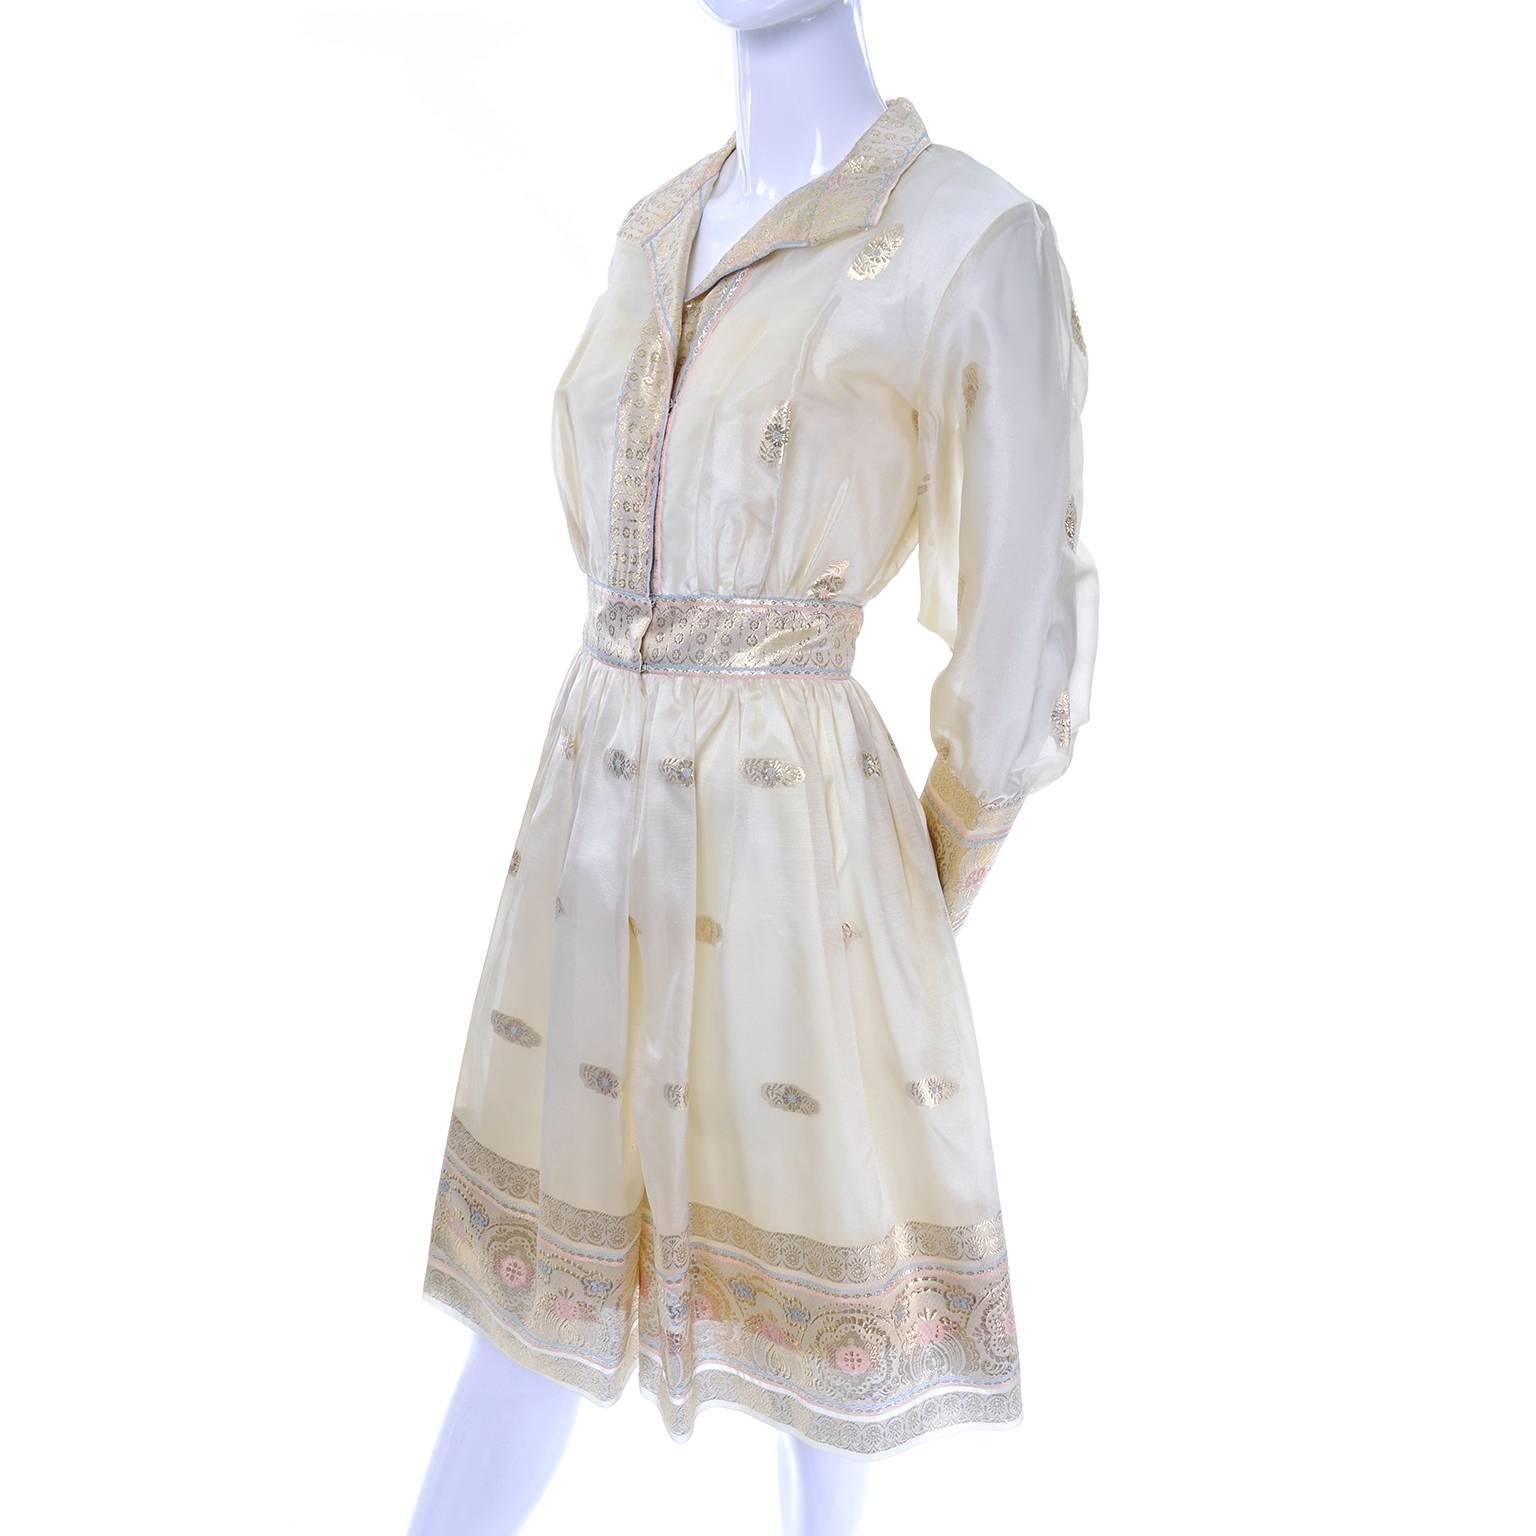 This lovely 1960's soft gold organza dress has floral and metallic gold ornamentation with light blue and pink accents. The dress has a built in slip and closes with snap closures up the front. This great vintage 60's dress has beautiful, sheer